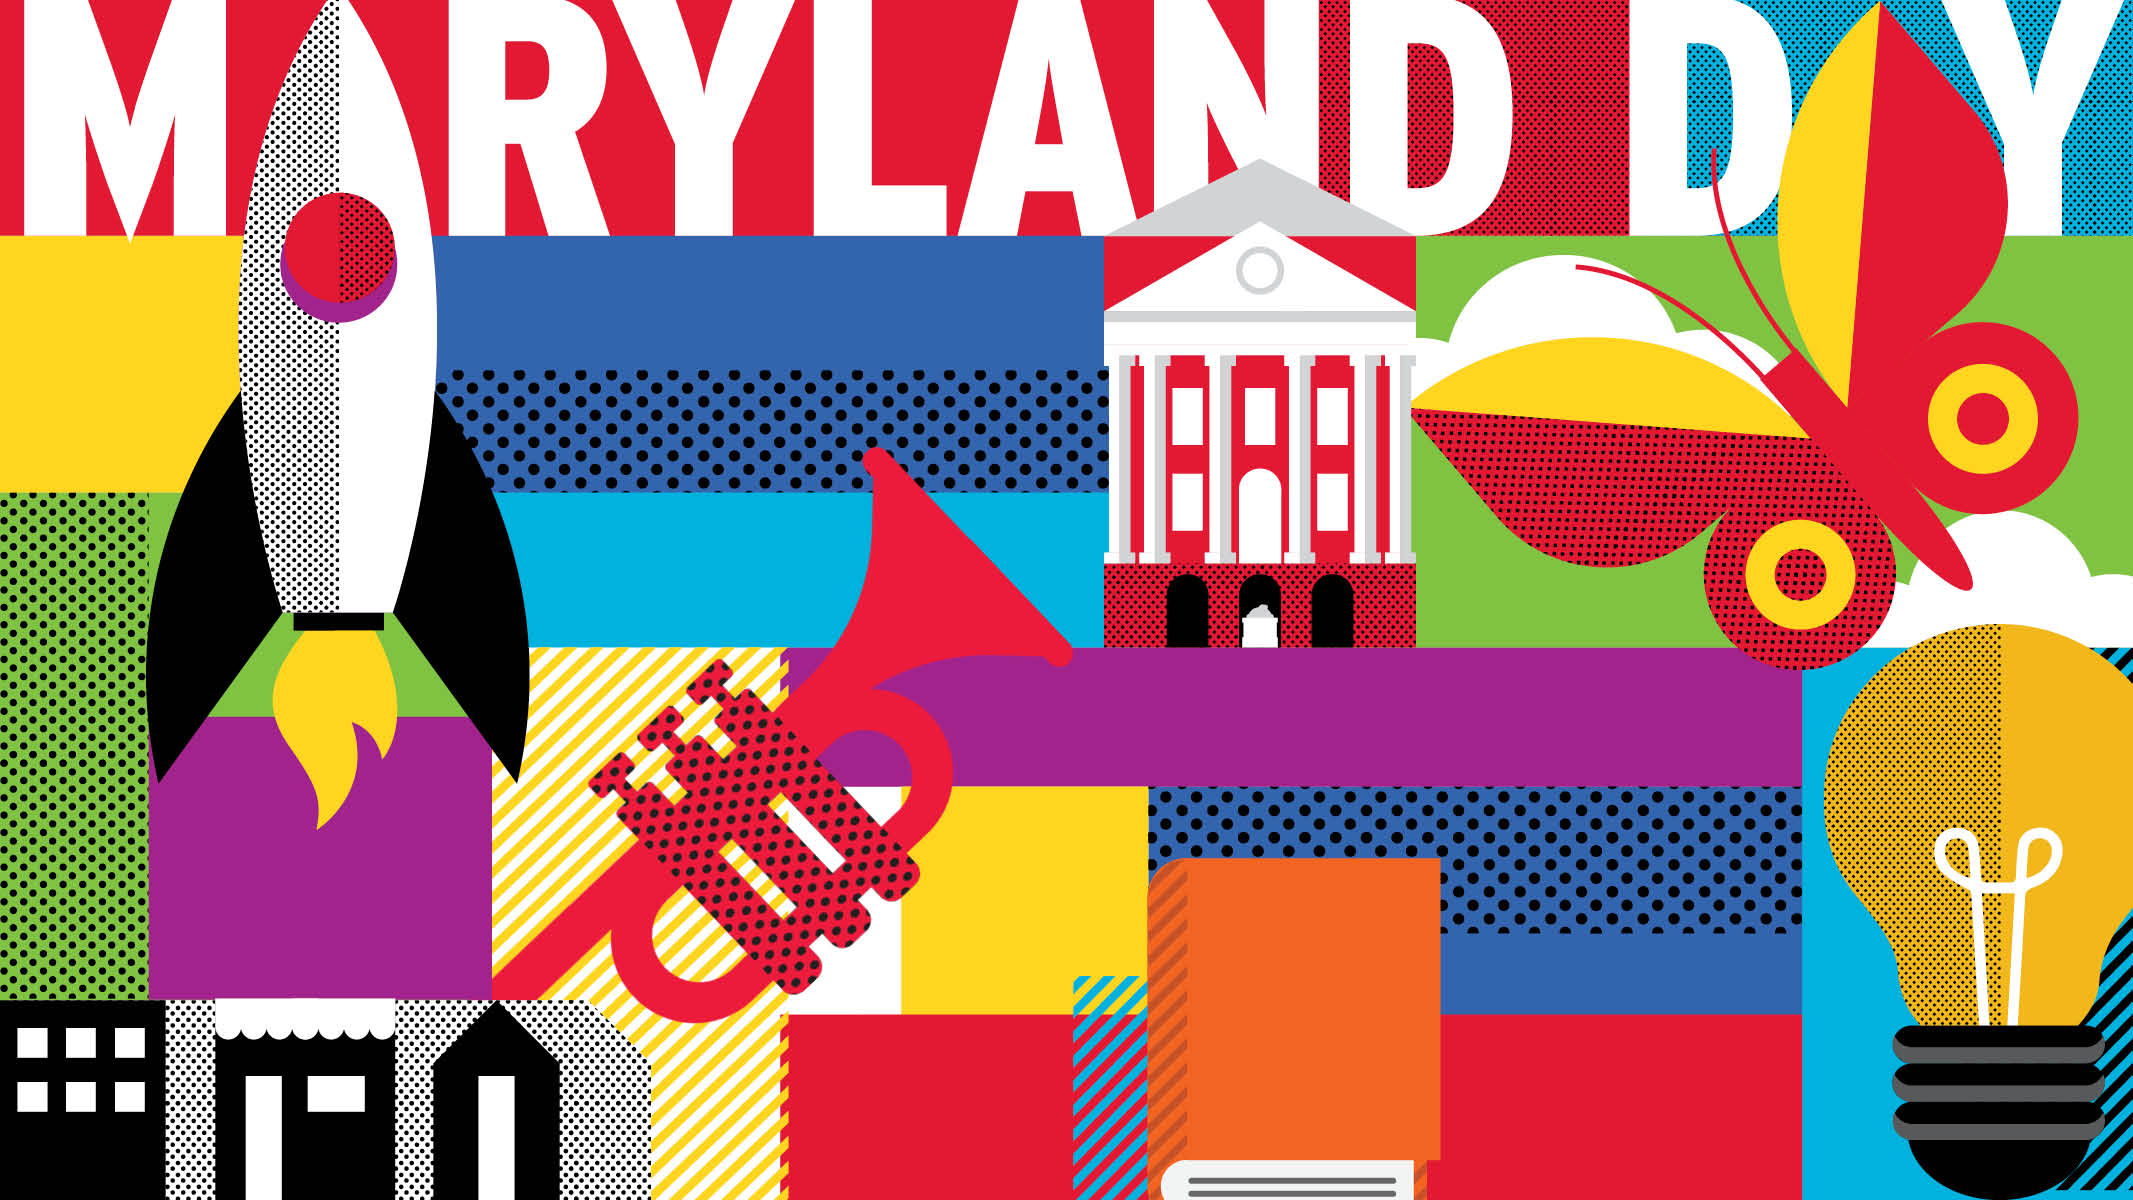 Maryland Day 2022 colorful graphic